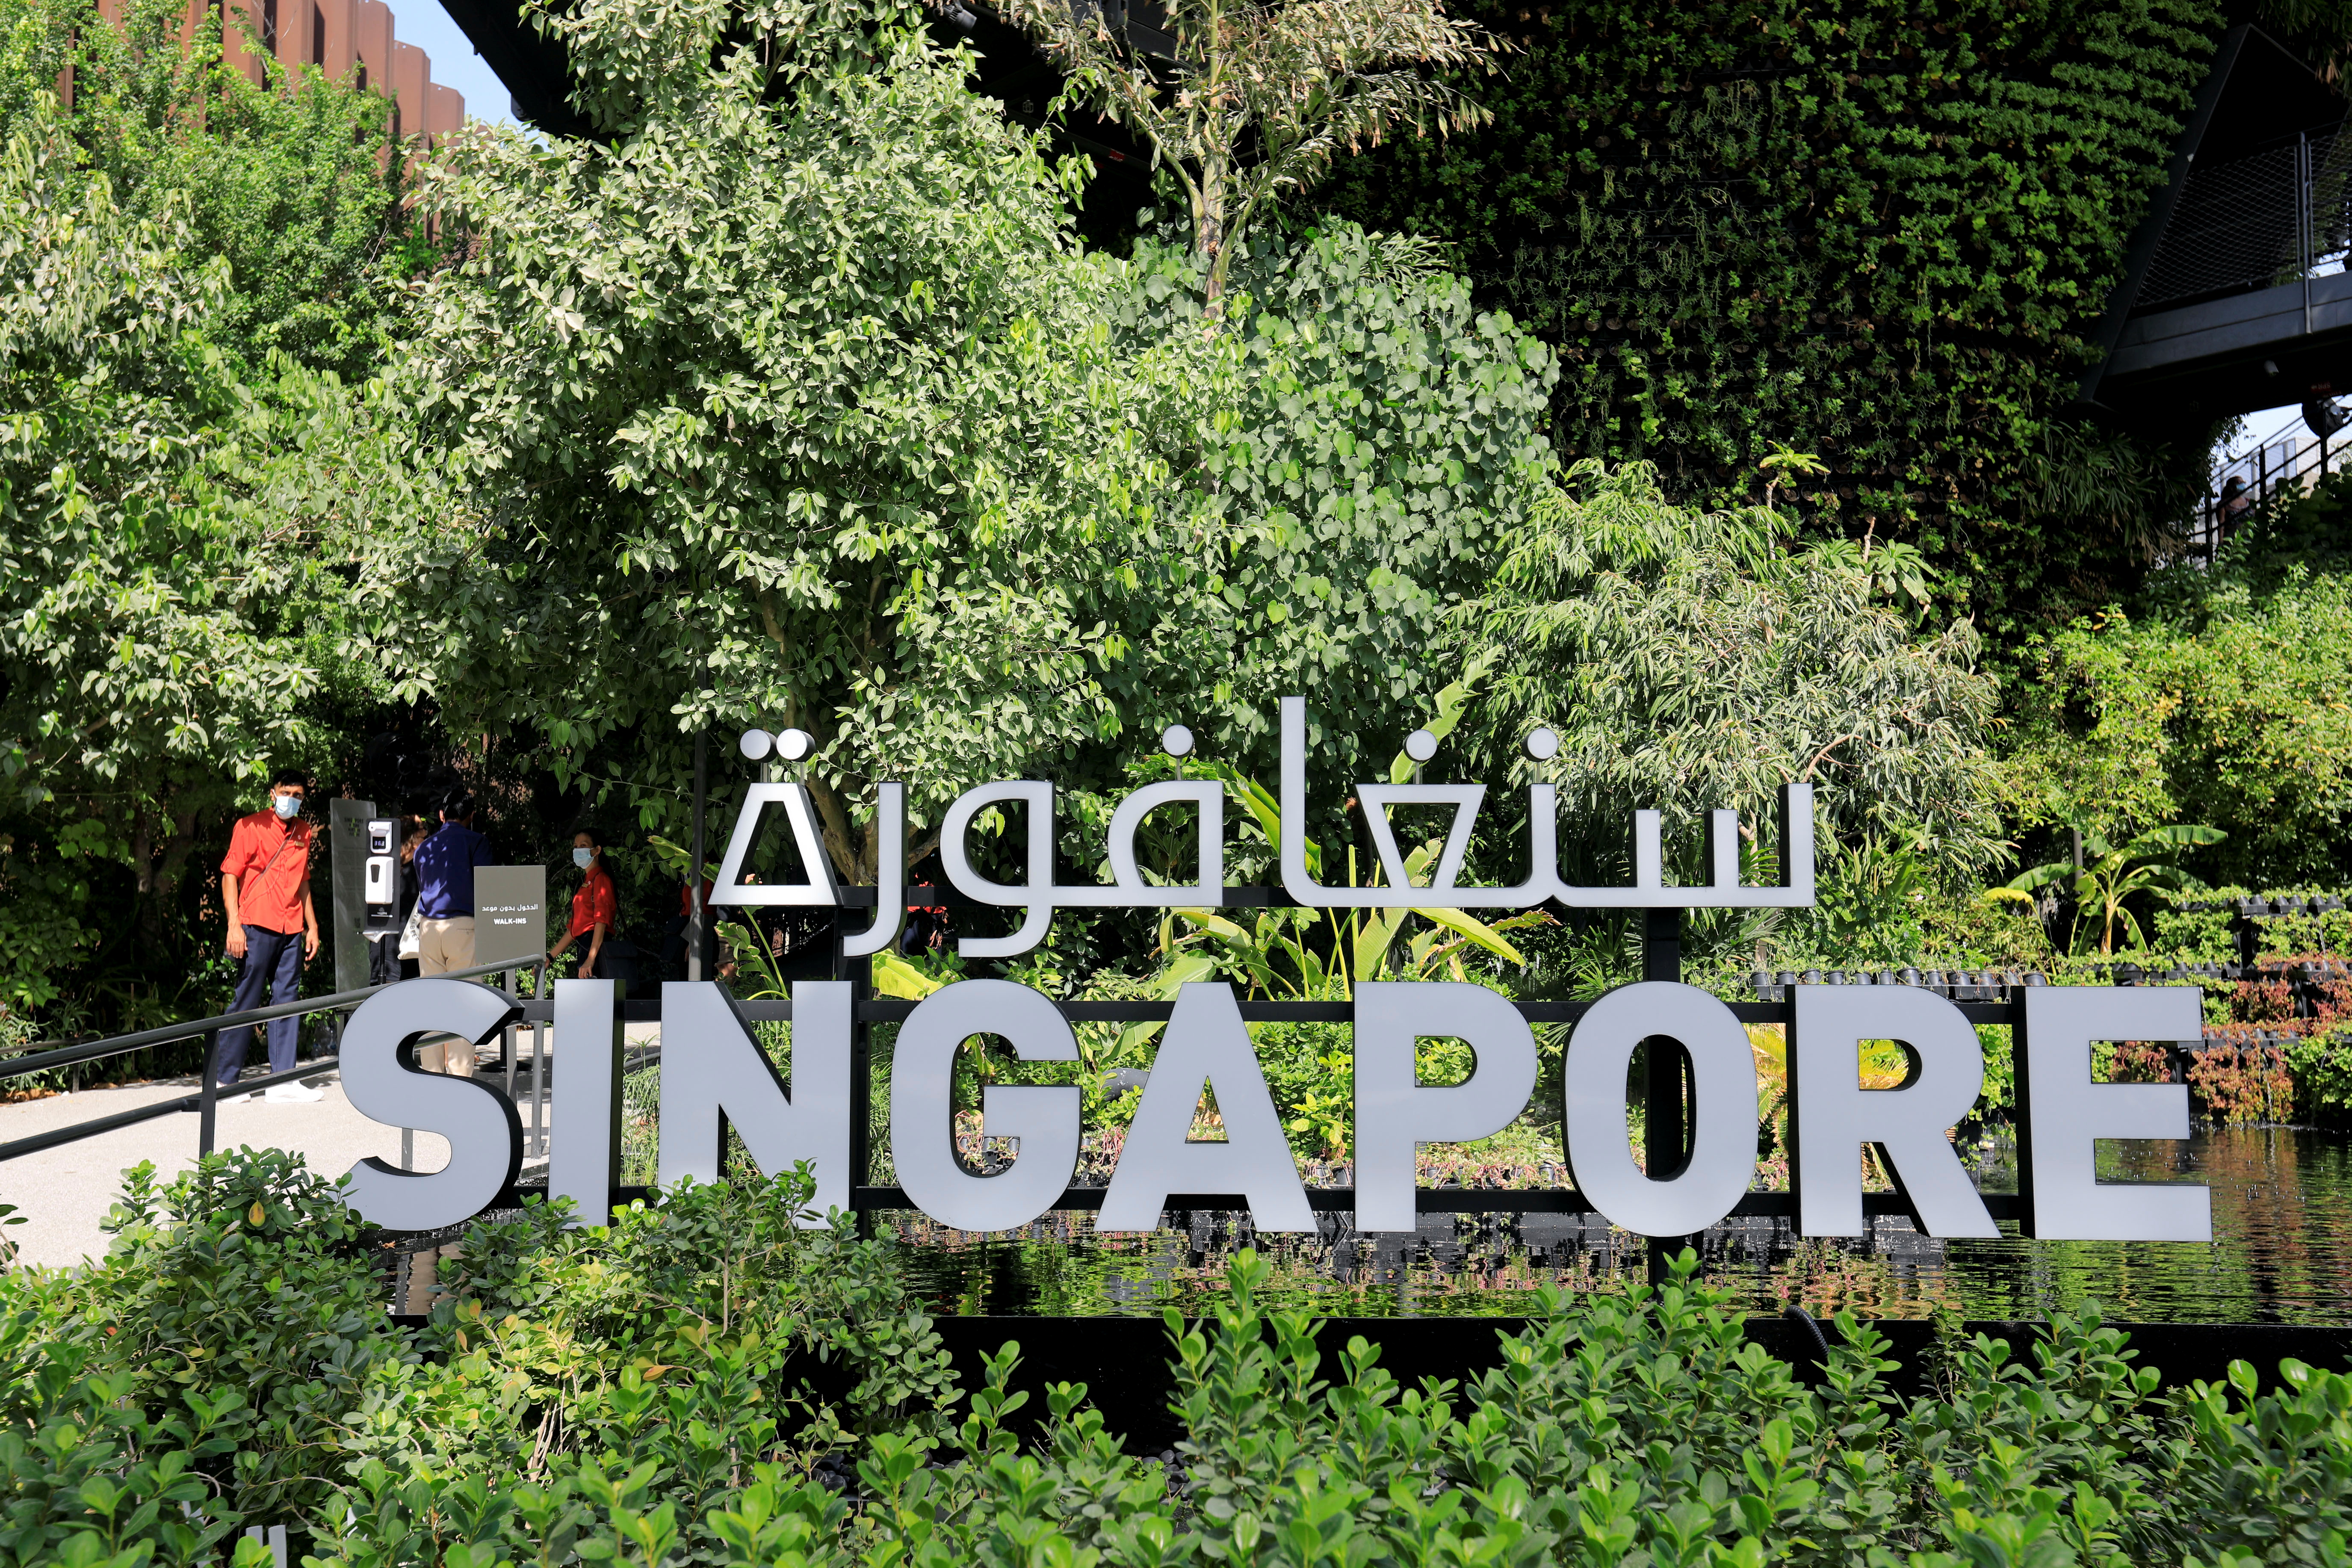 Workers are pictured at the Singapore Pavilion at Dubai Expo 2020 in Dubai